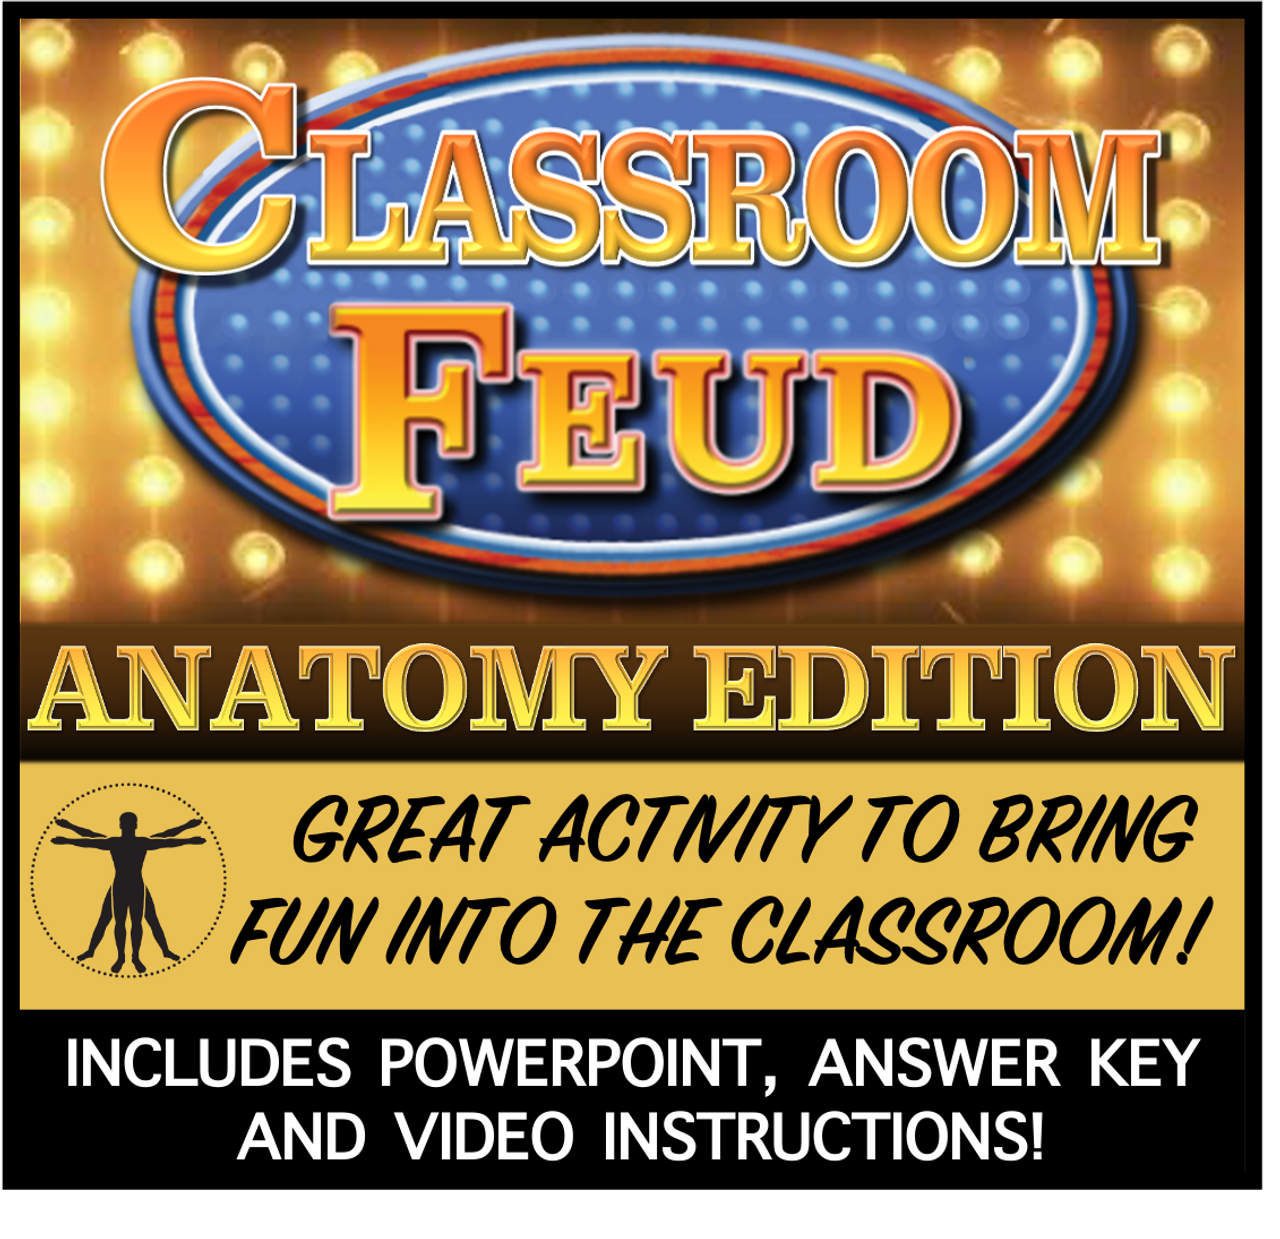 CLASSROOM FEUD- ANATOMY EDITION! Great game to bring FUN in the classroom!